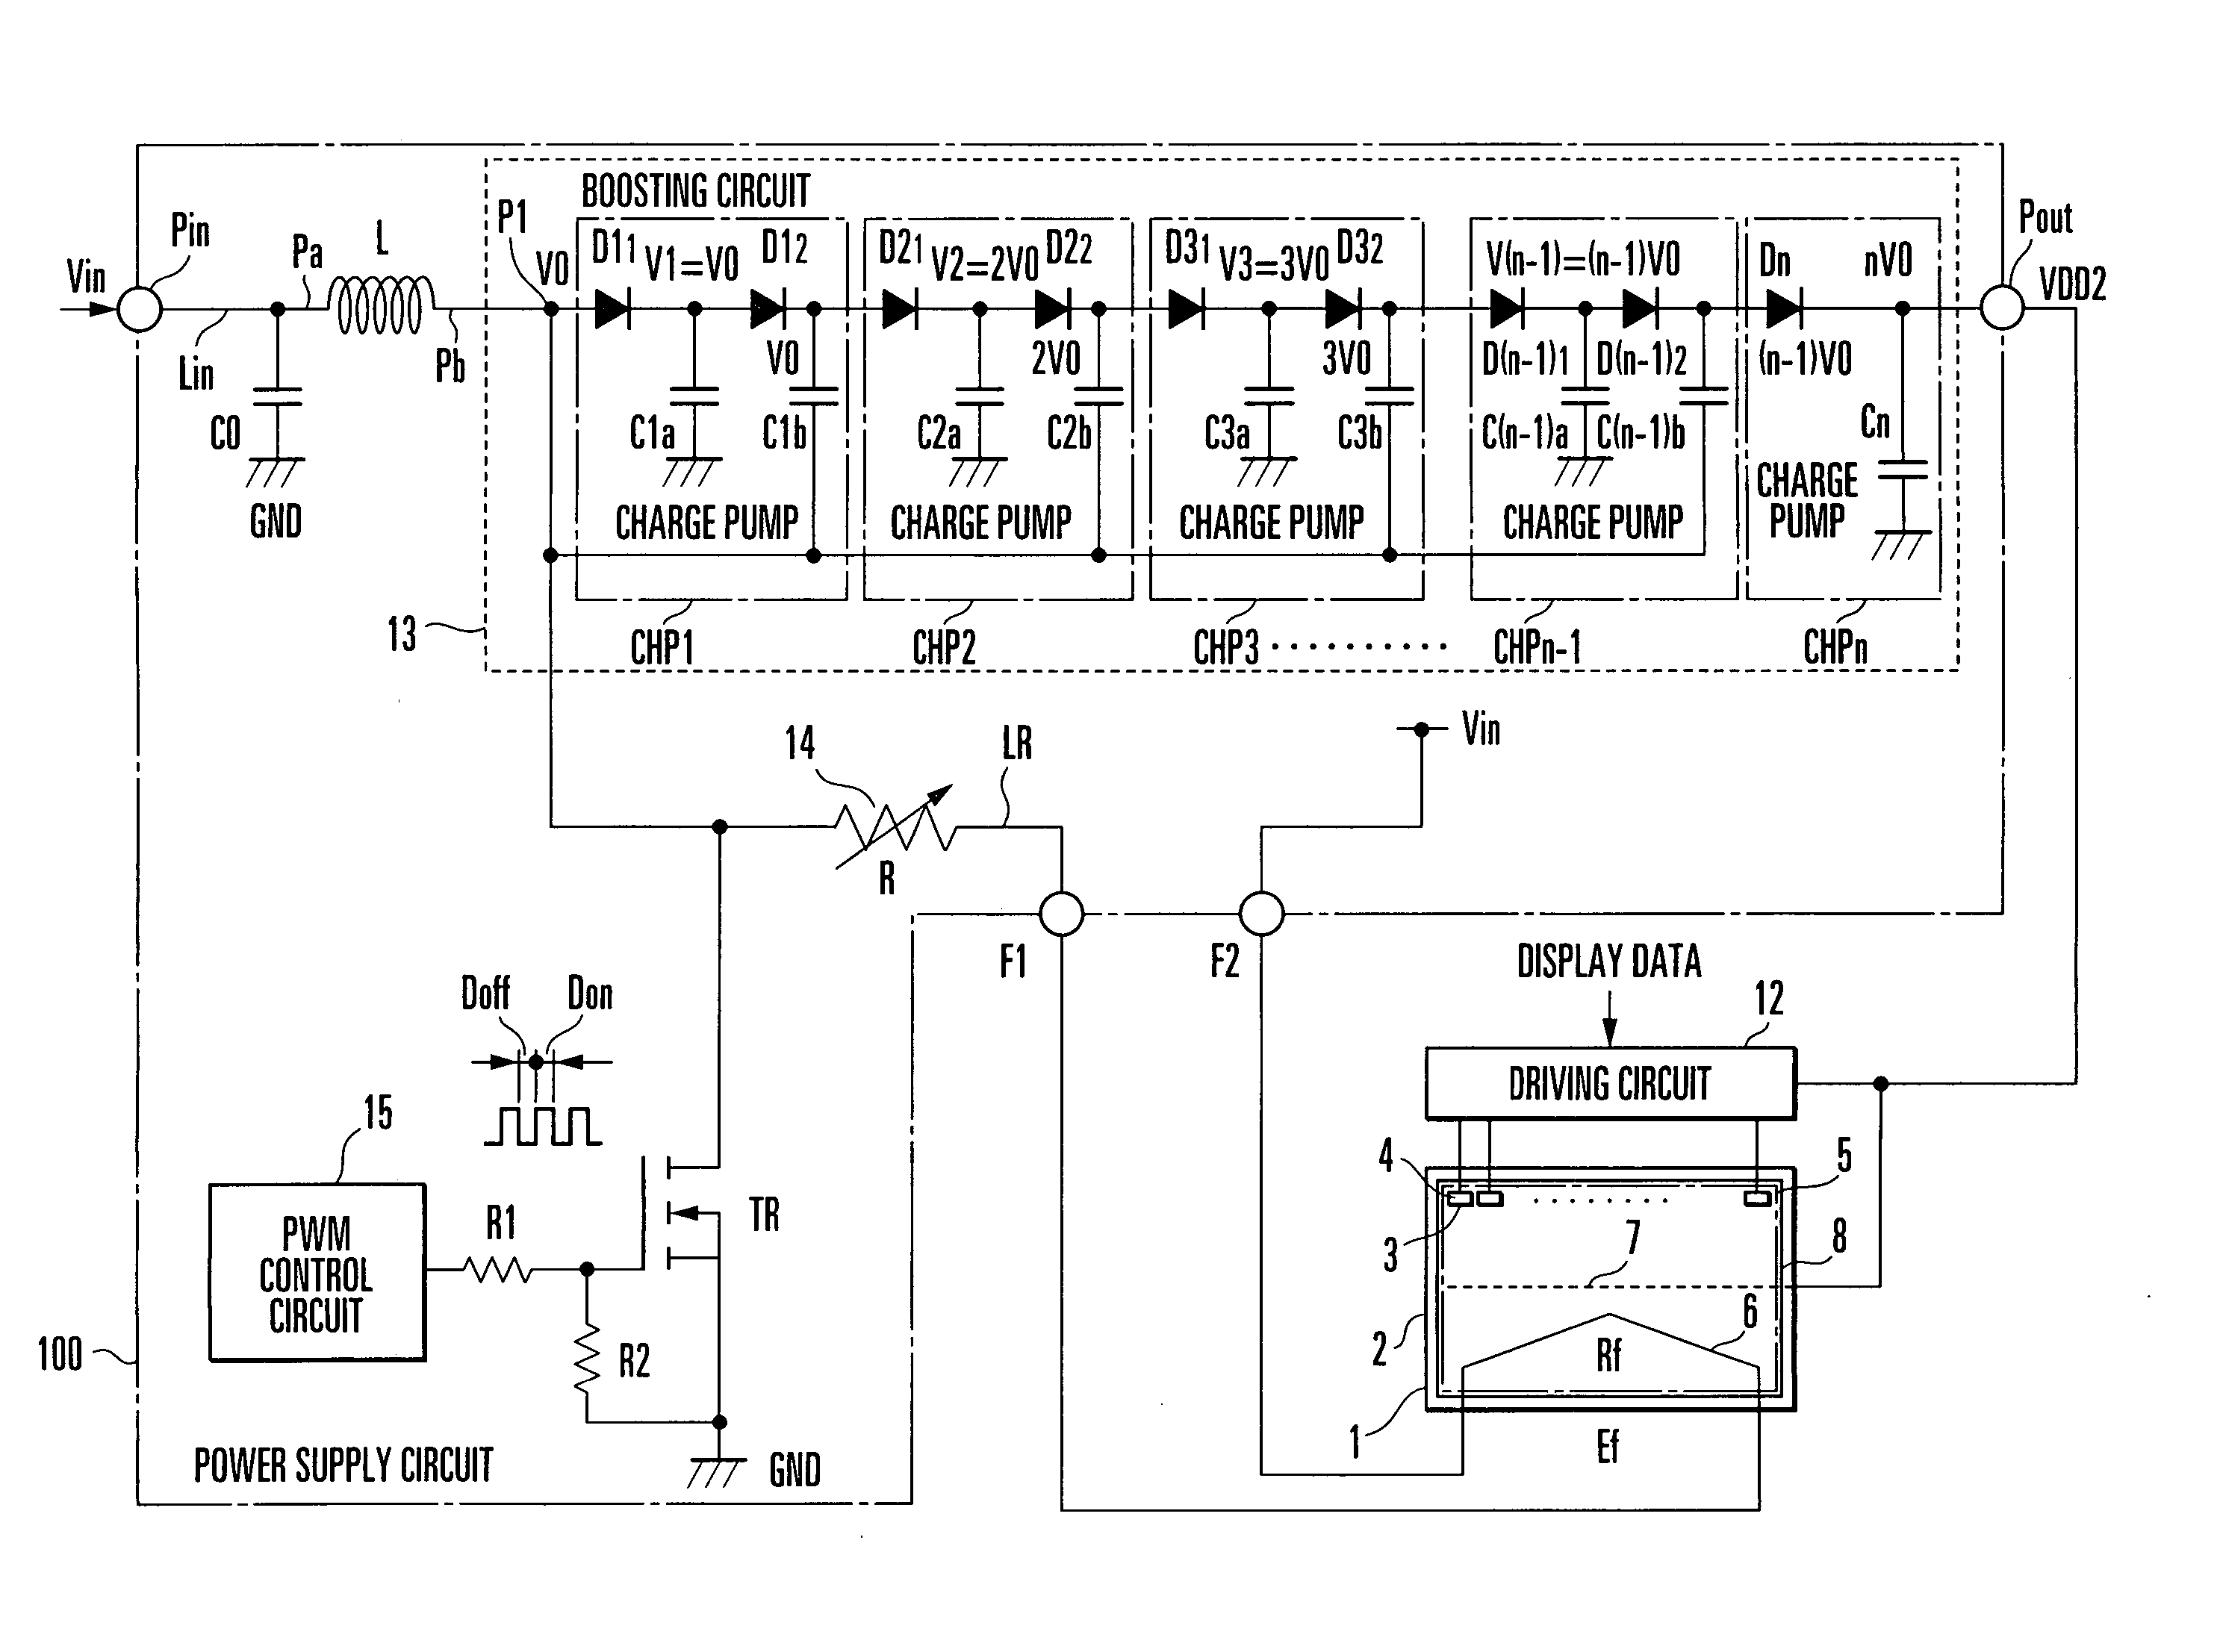 Power supply circuit for vacuum fluorescent display